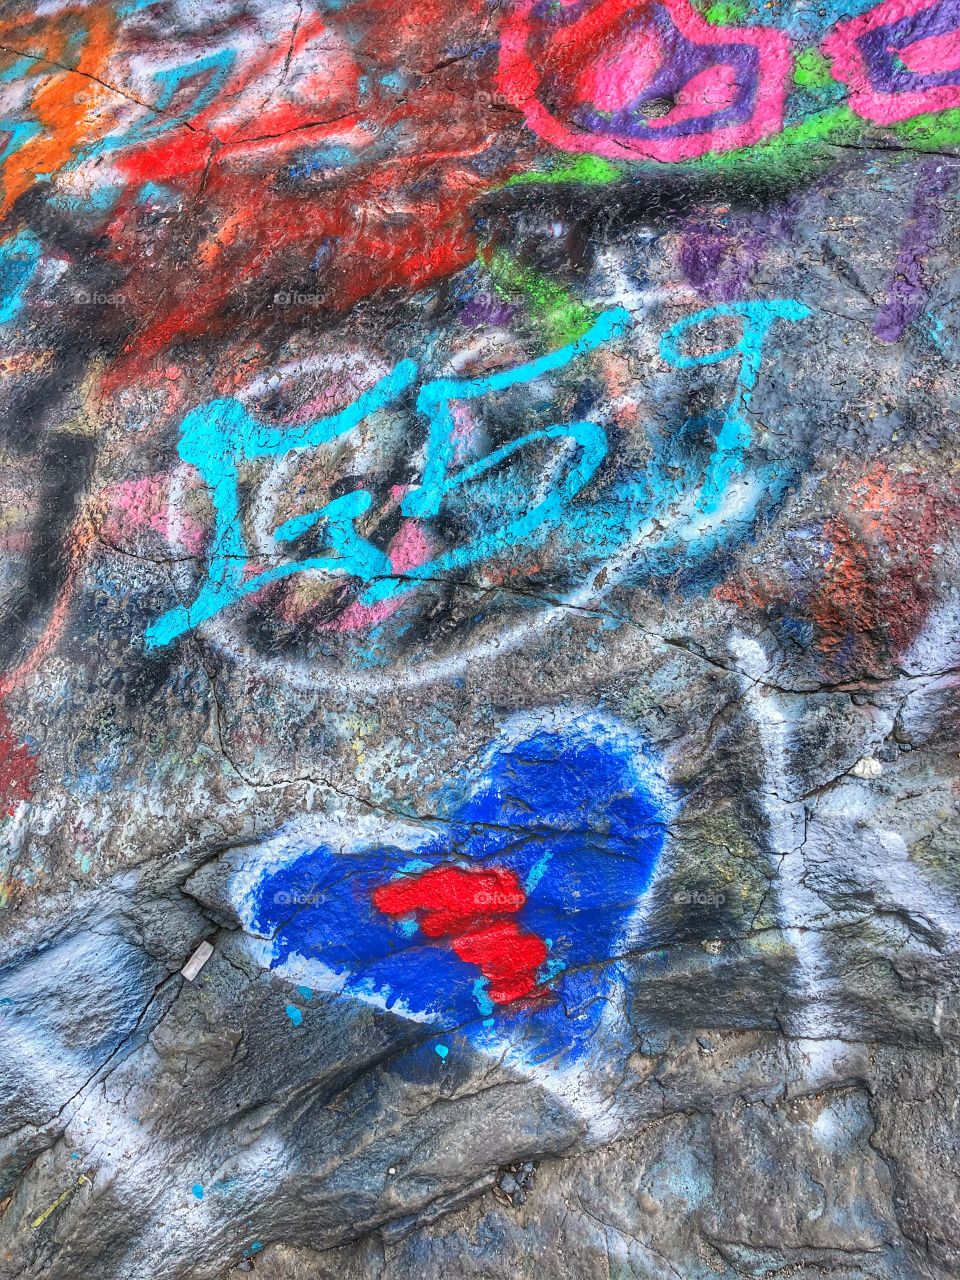 Graffiti on boulders at high rock in cascade Maryland 